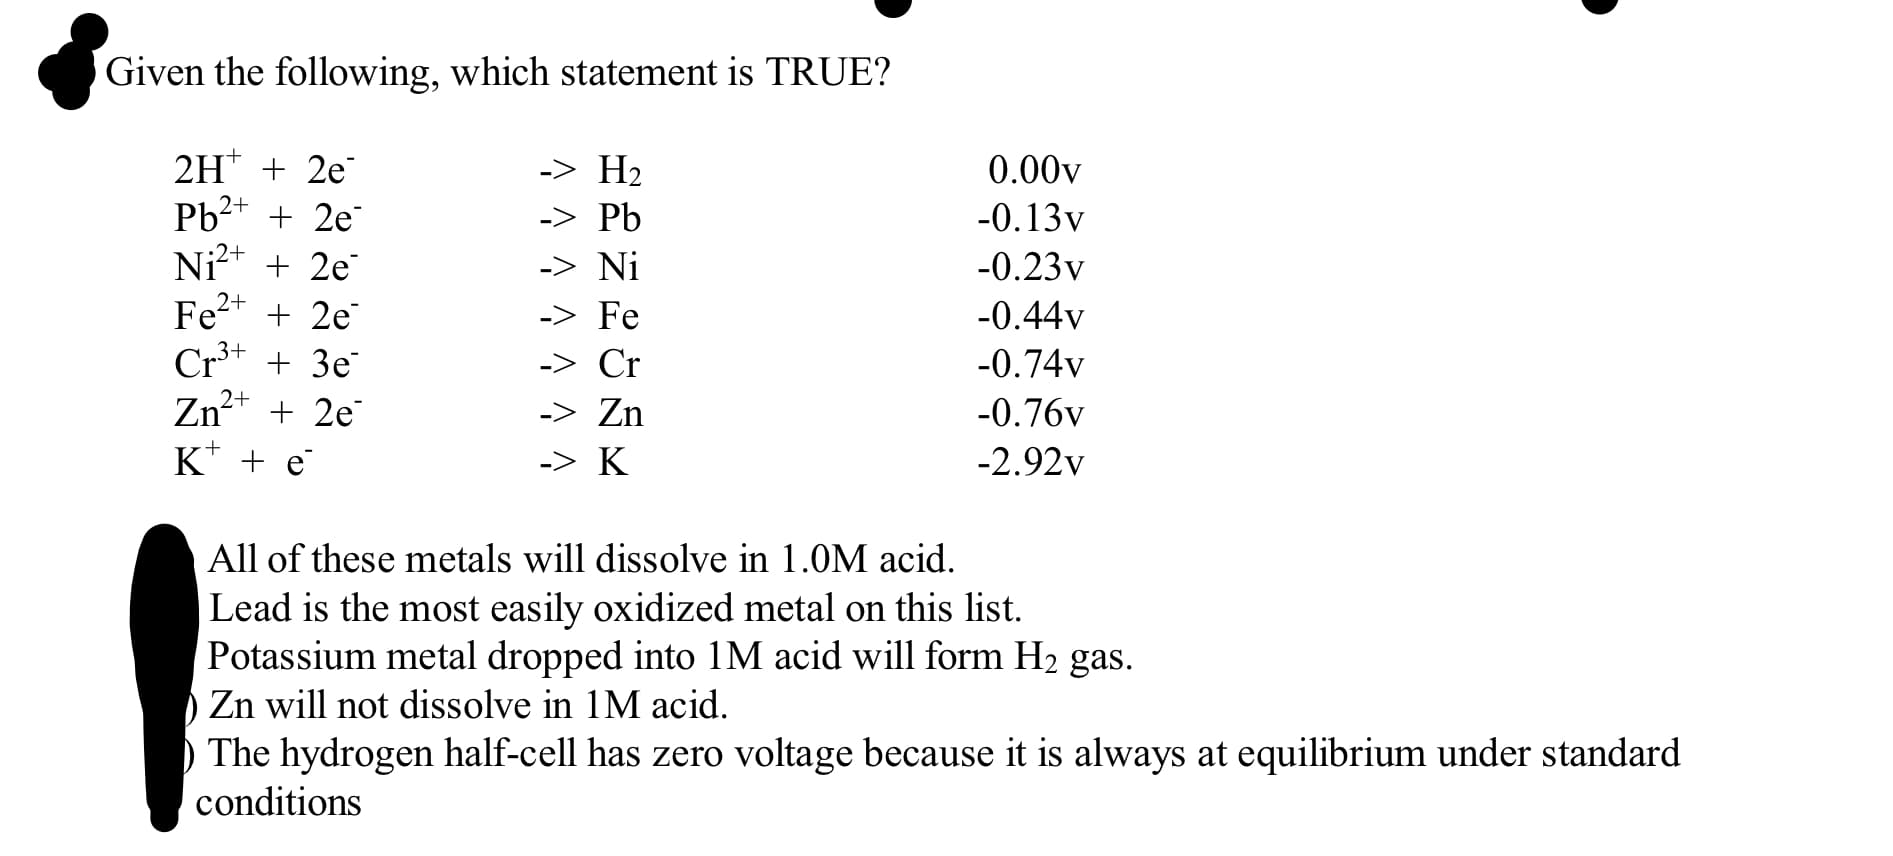 Given the following, which statement is TRUE?
2H* + 2e
Pb2+ + 2e
Ni²* + 2e
Fe2+ + 2e
Cr* + 3e
Zn²+ + 2e
K* + e
-> H2
0.00v
-> Pb
-0.13v
-> Ni
-0.23v
-> Fe
-0.44v
-> Cr
-0.74v
-> Zn
-0.76v
-> K
-2.92v
All of these metals will dissolve in 1.0M acid.
Lead is the most easily oxidized metal on this list.
Potassium metal dropped into 1M acid will form H2 gas.
Zn will not dissolve in 1M acid.
The hydrogen half-cell has zero voltage because it is always at equilibrium under standard
conditions
